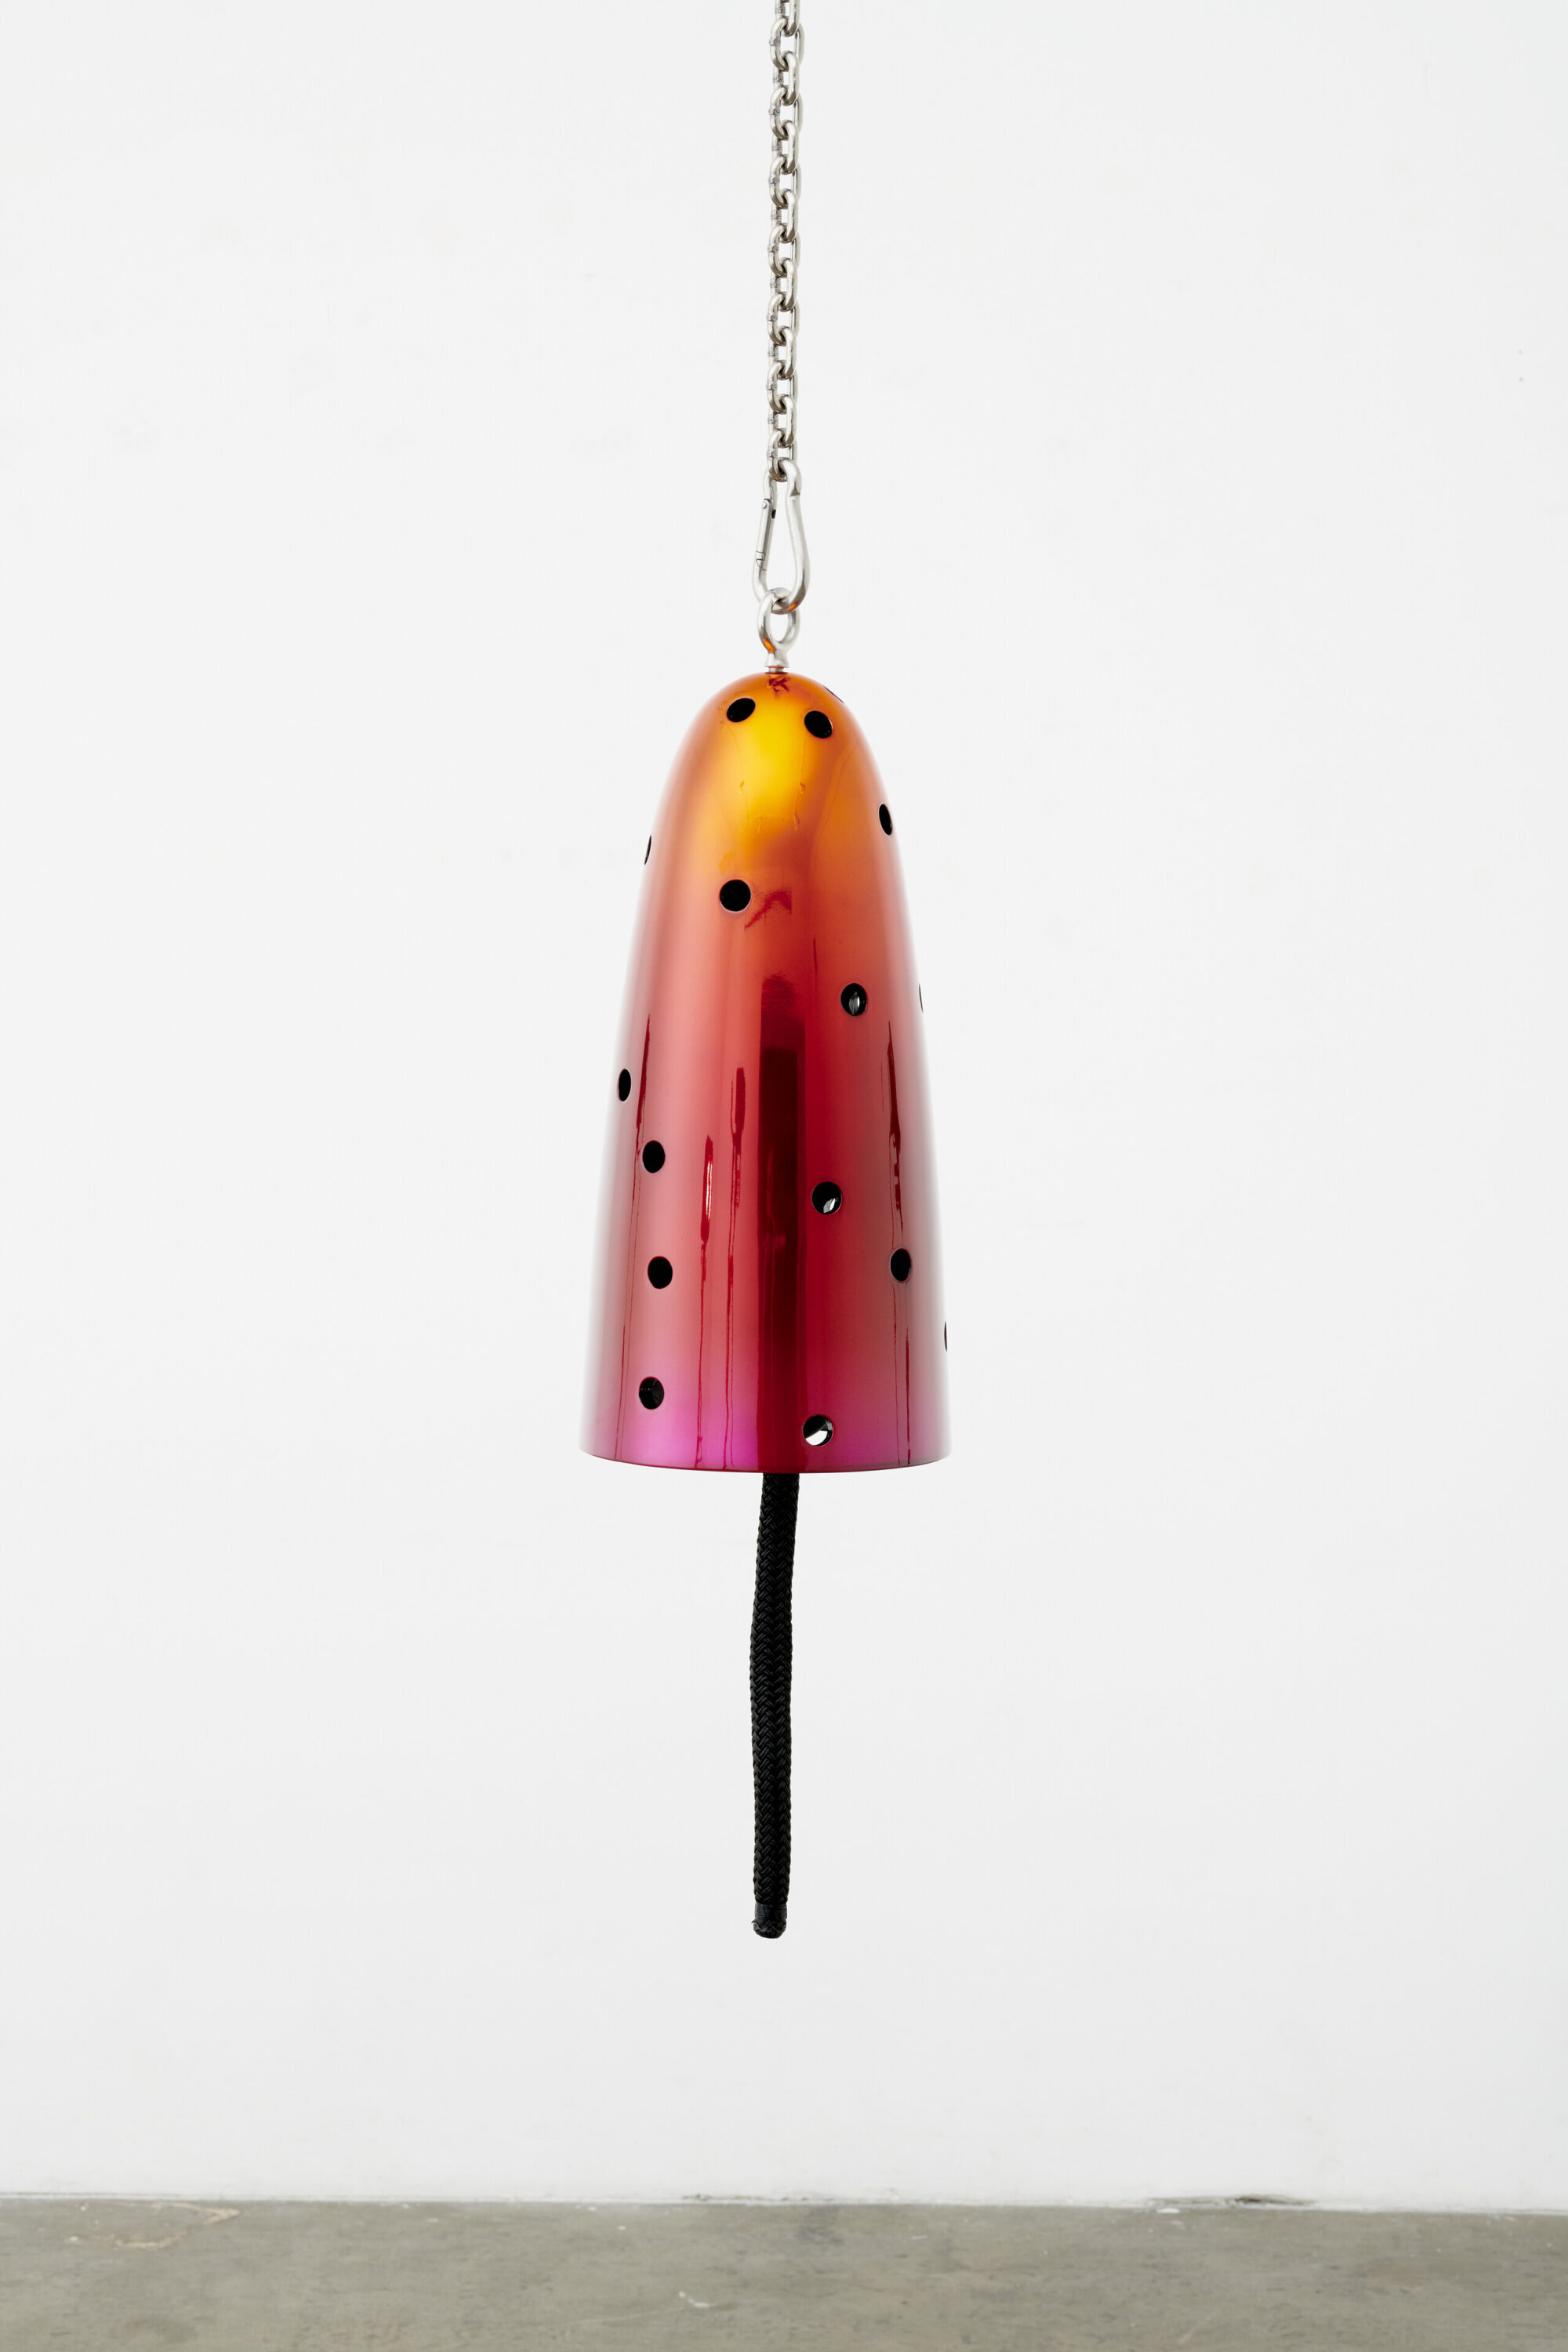 A bell-shaped sculpture in metallic shades of pink, red, and orange. The bell form is perforated and hangs from a silver metal chain.